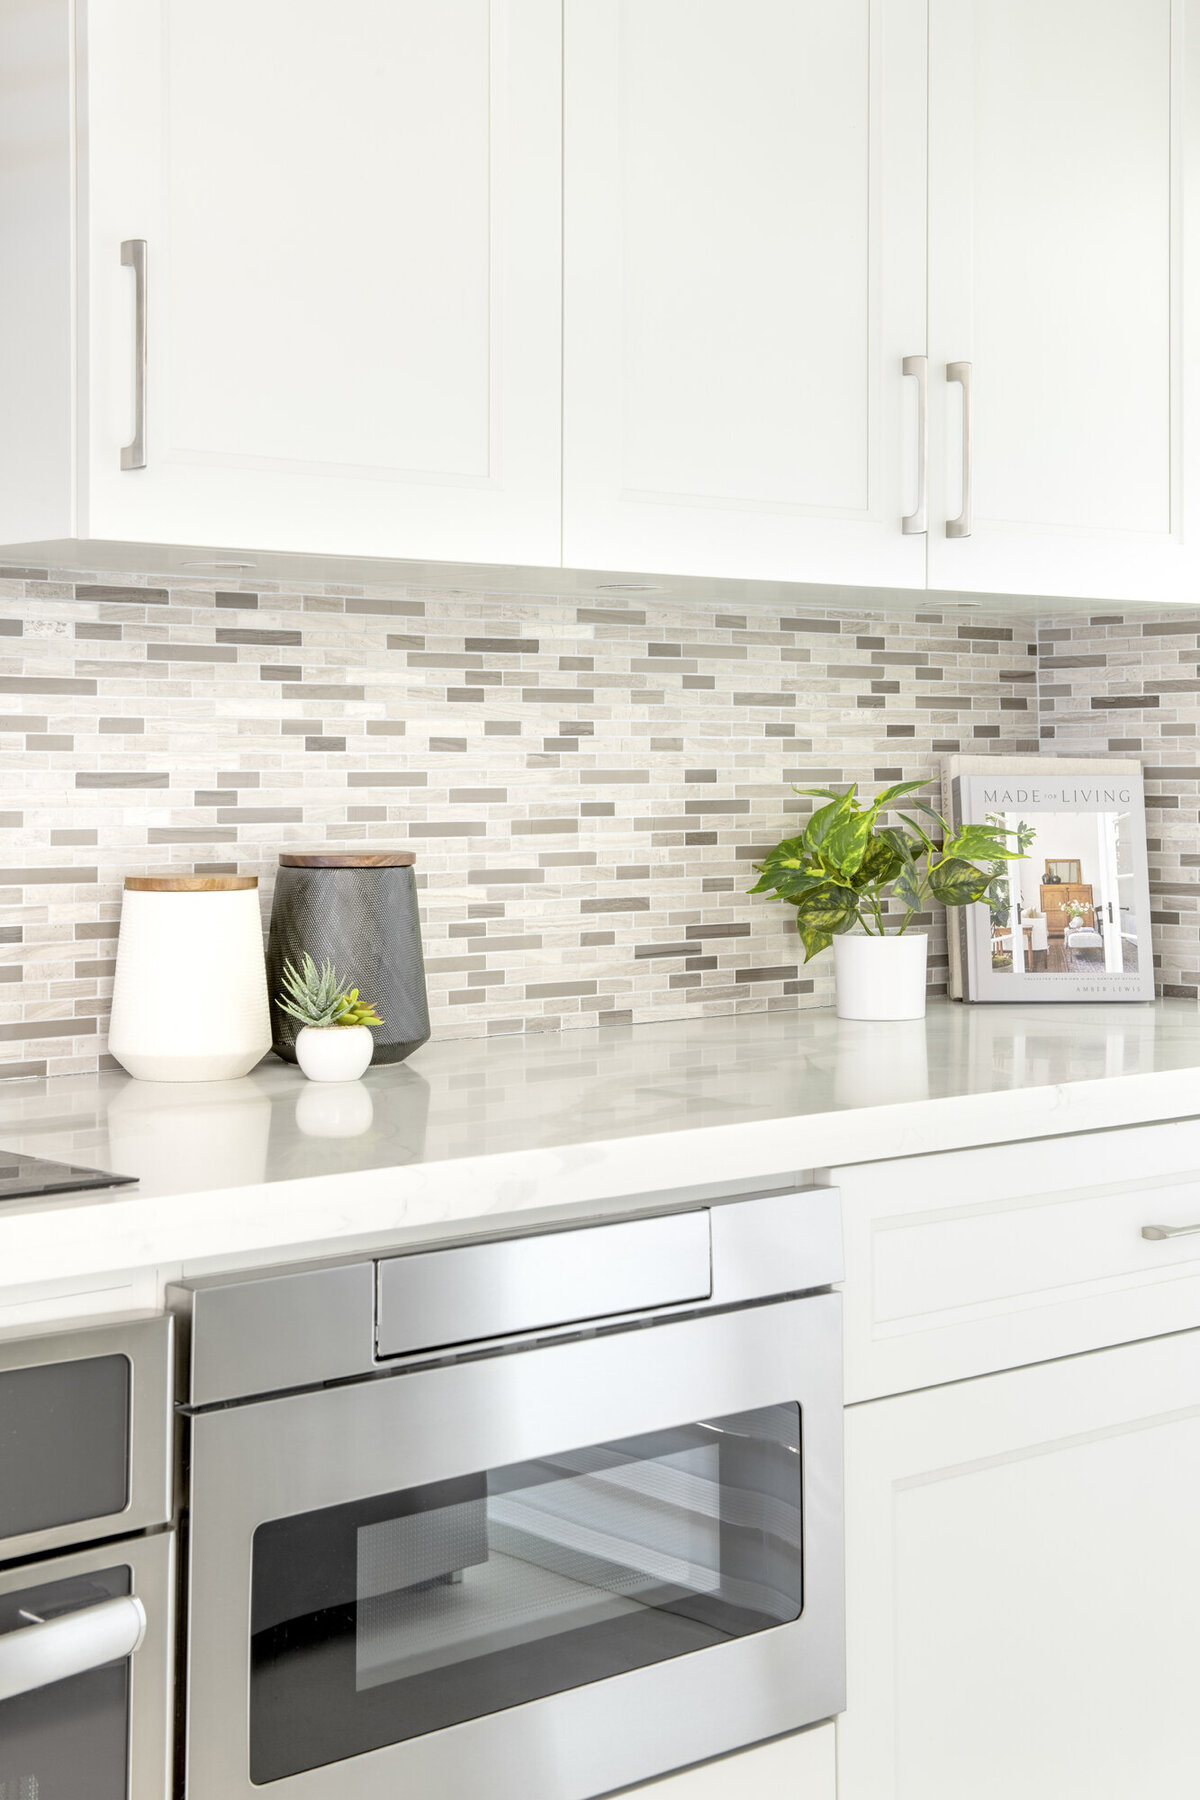 White and Bright Kitchen Countertop Styling by S. FL based SOL Y MAR INTERIORS